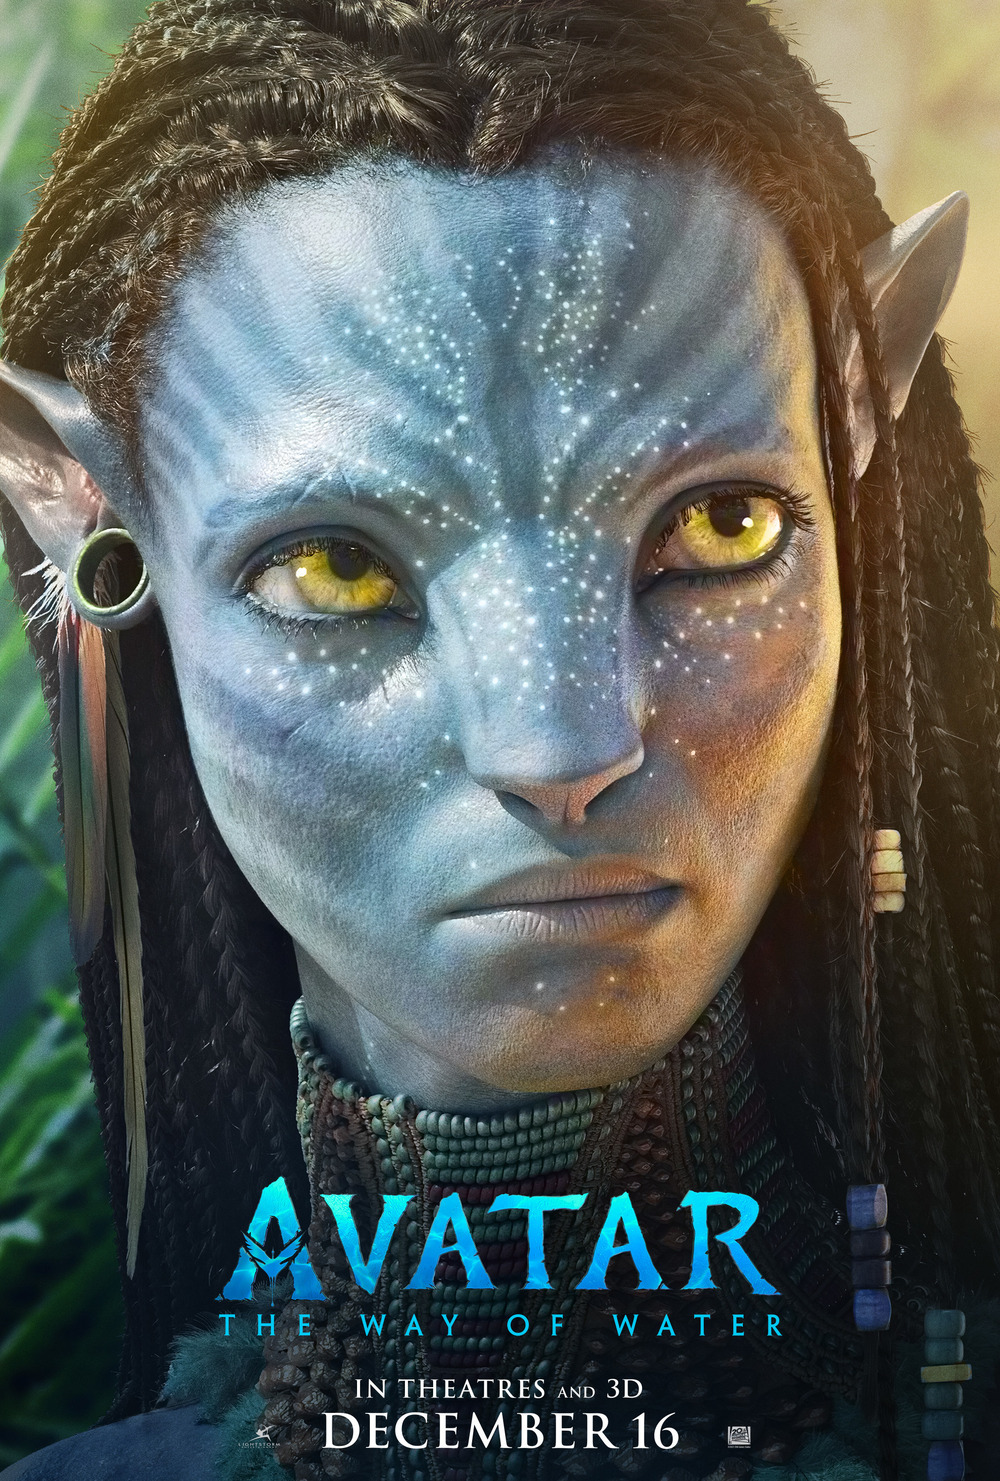 avatar the way of water christian movie review